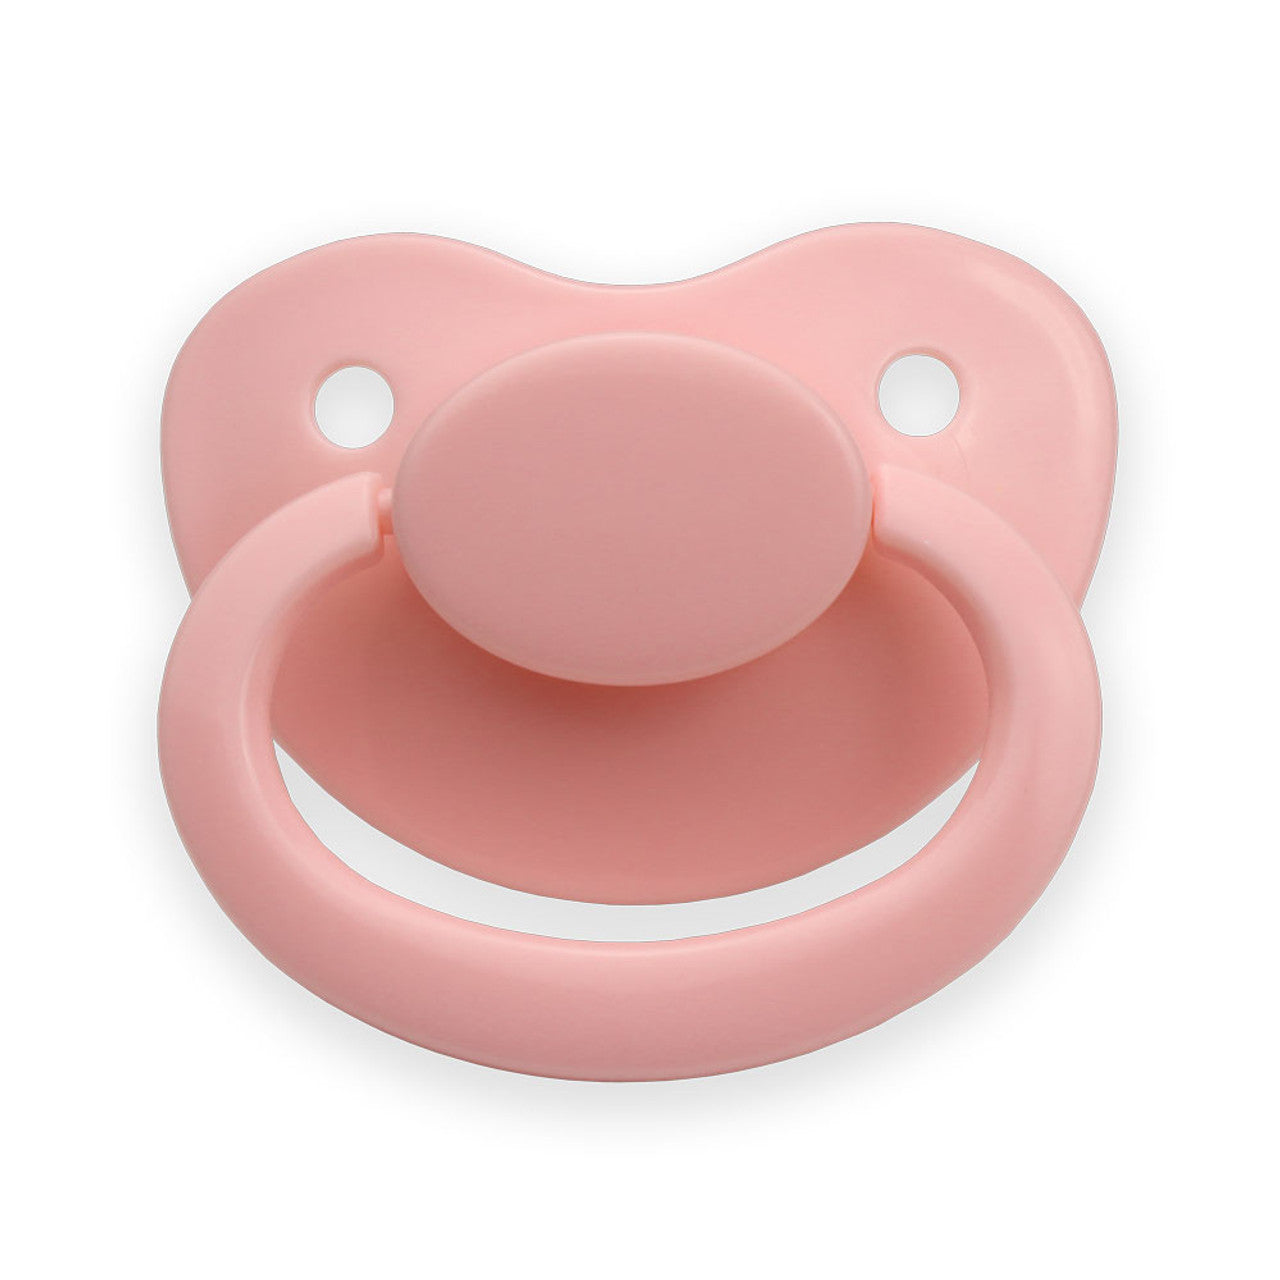 Adult Size 6 Pacifier pink